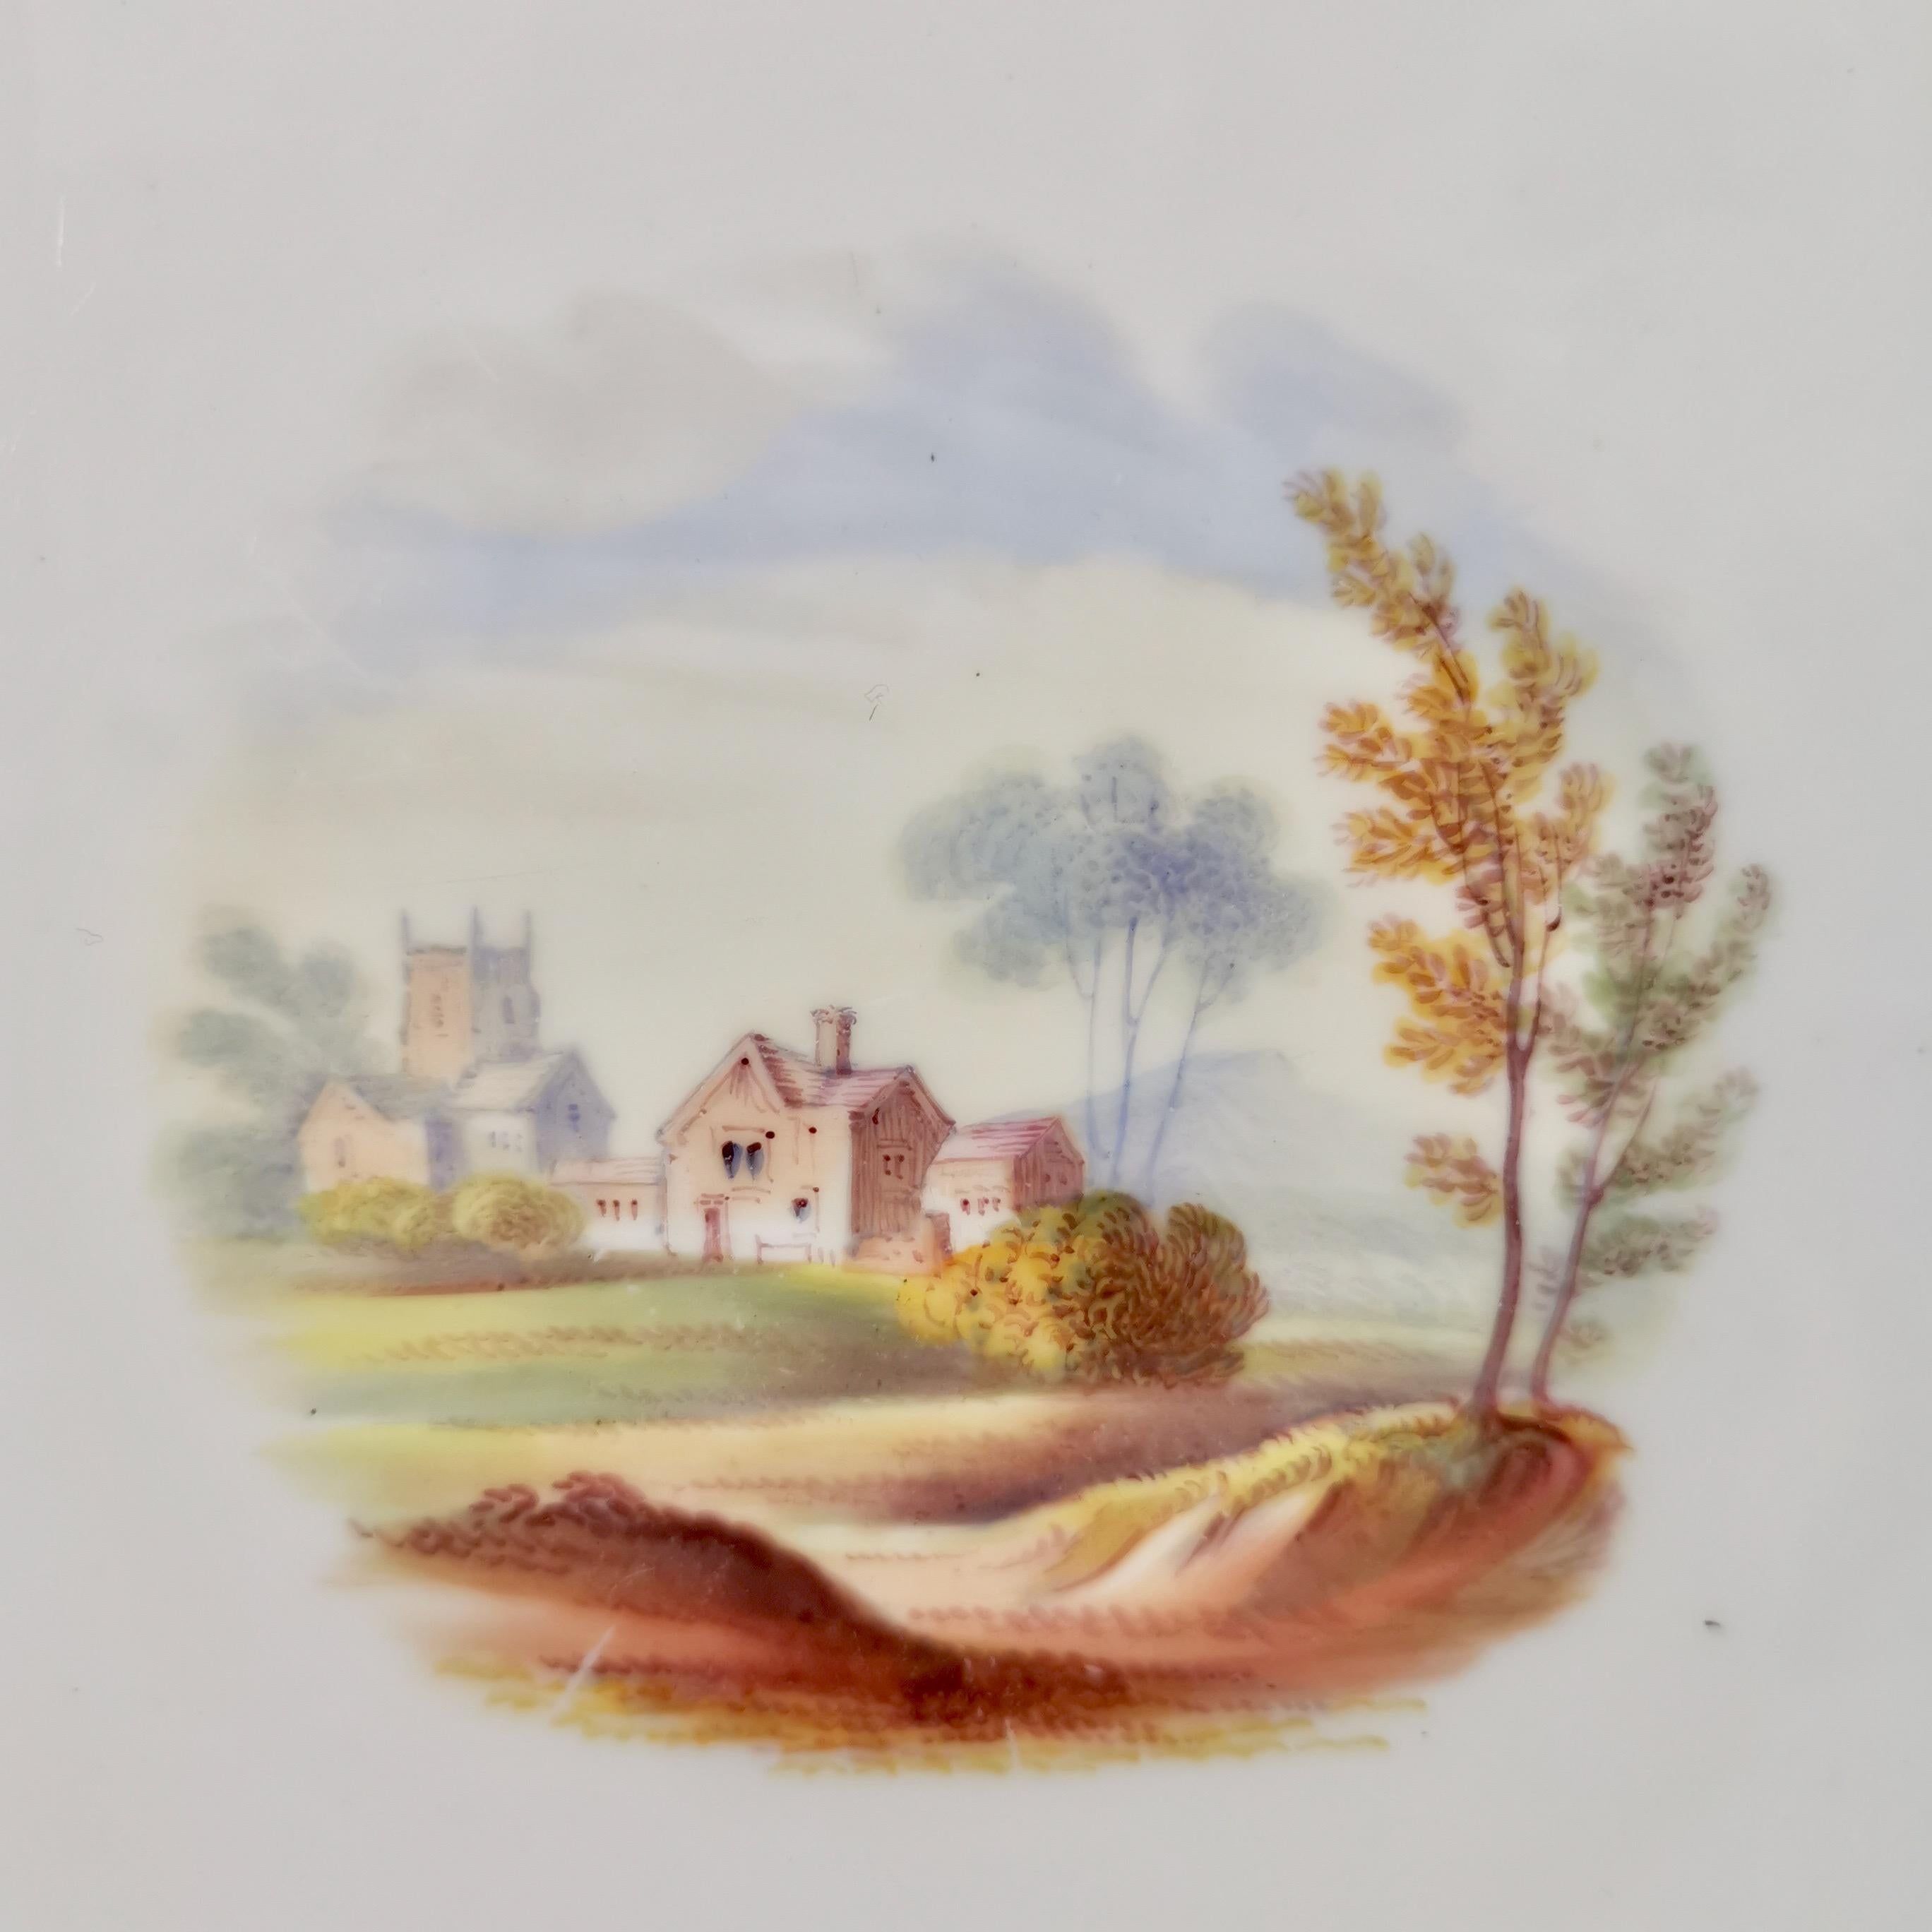 English Coalport Porcelain Cake Plate, Beige with Landscapes, Rococo Revival, ca 1840